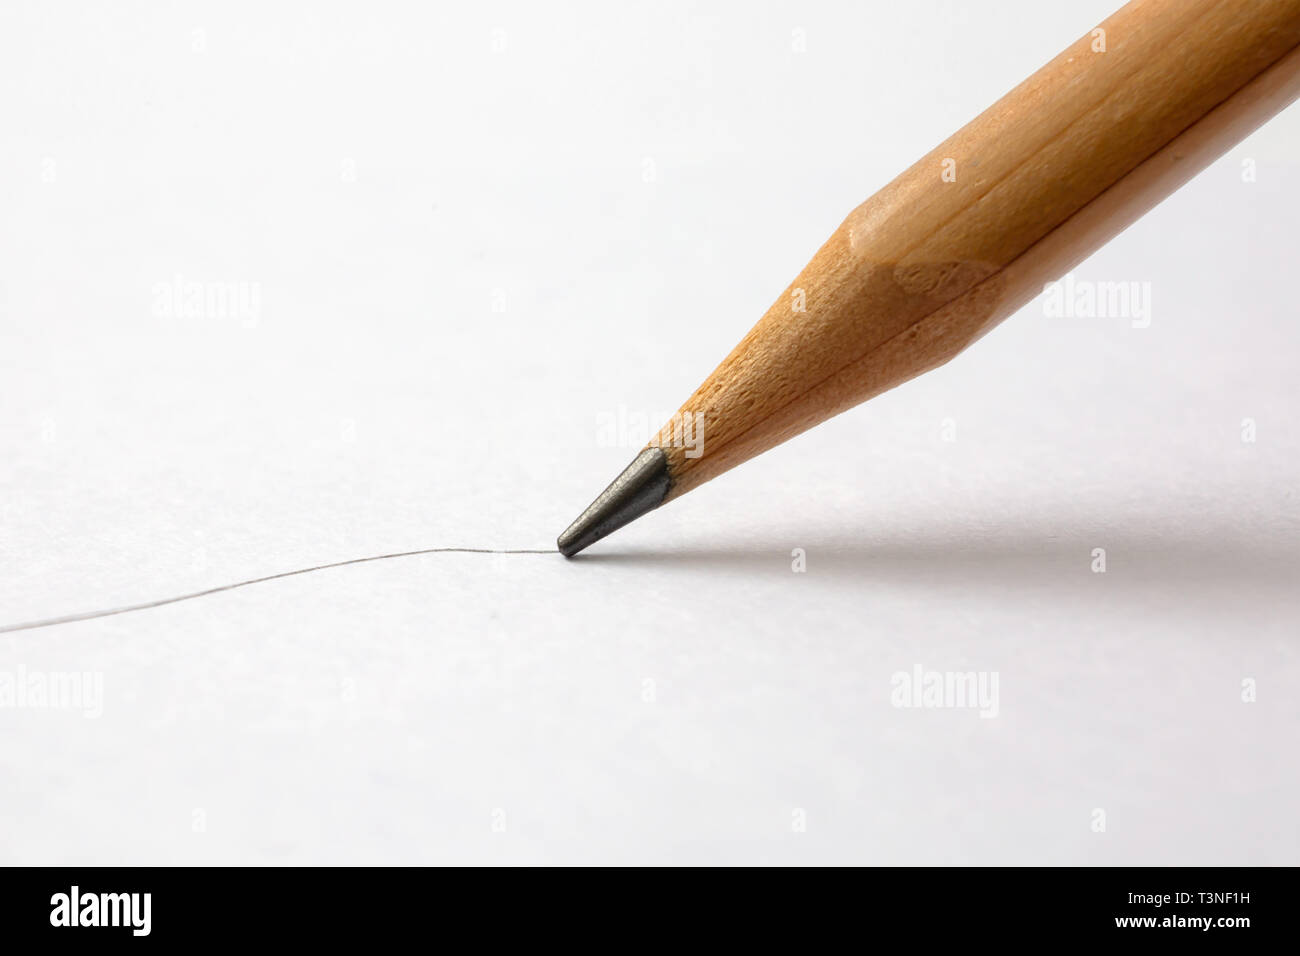 A closeup view of a black pencil drawing a line on a textured paper surface. Stock Photo